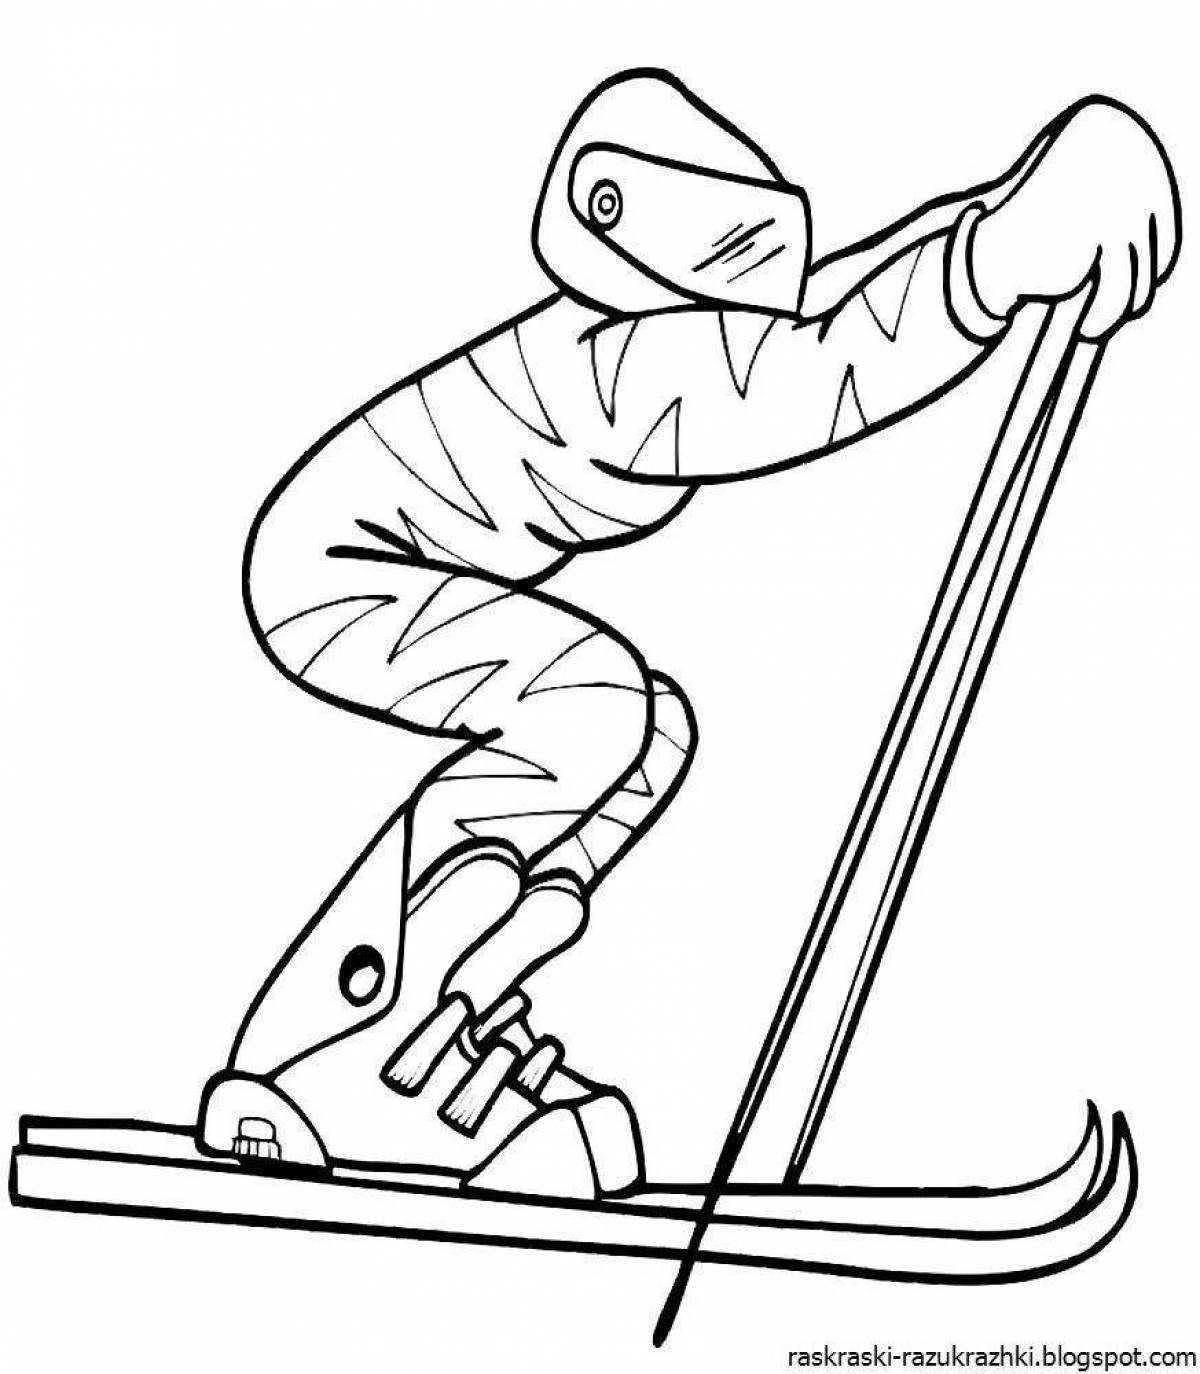 Live winter sports coloring page